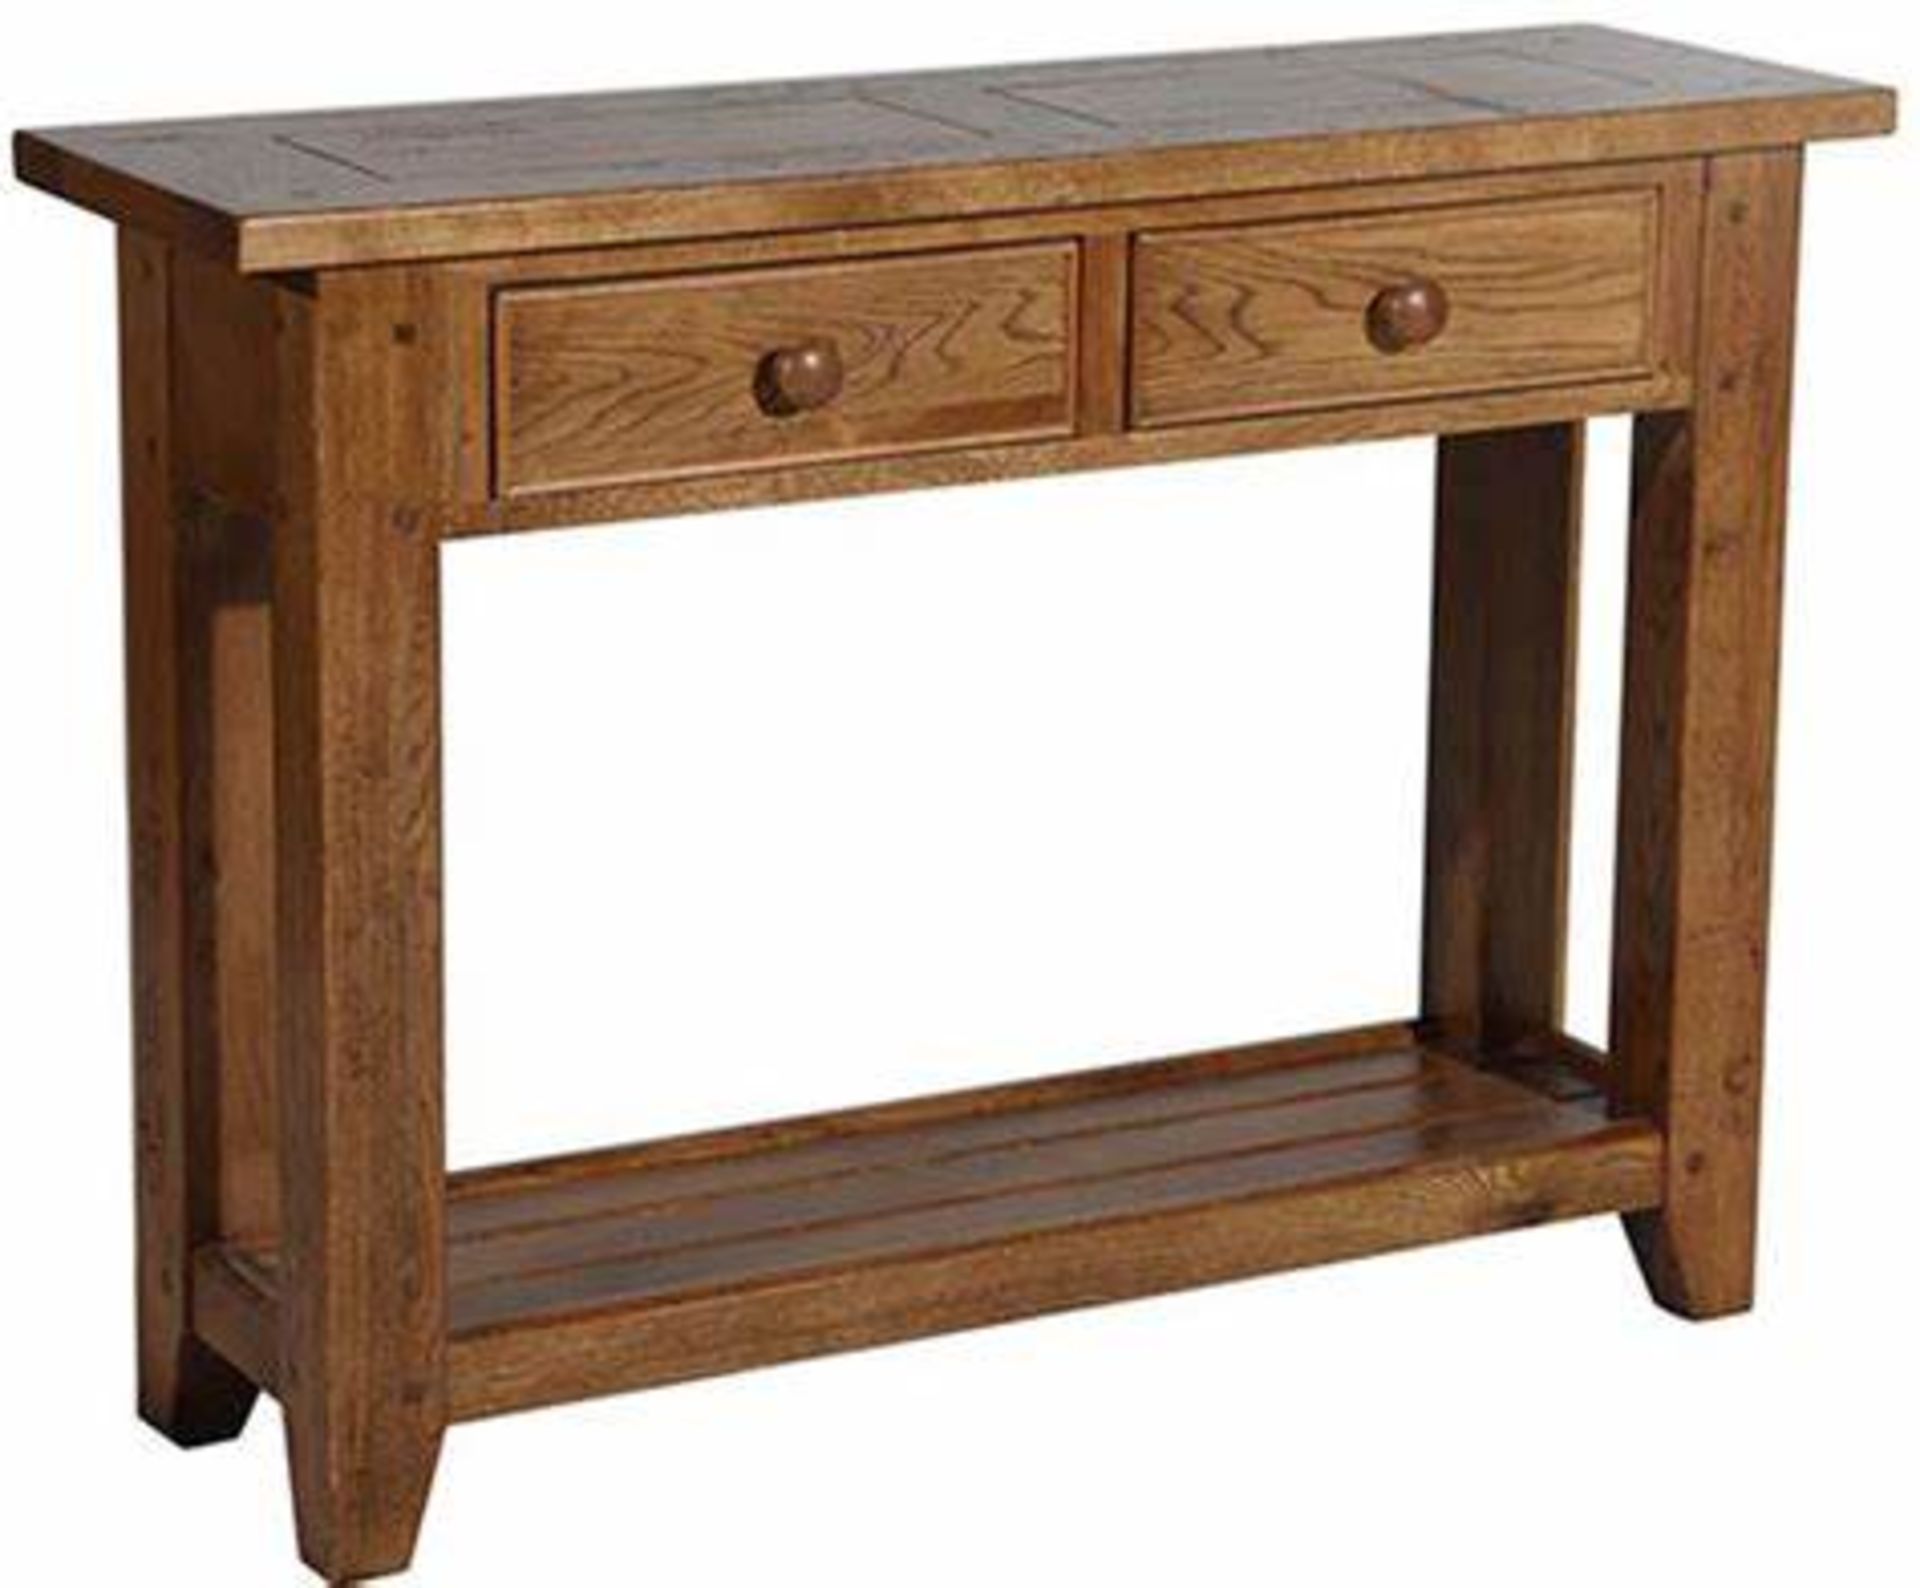 Halo Wentworth Compact Console Table Crafted from solid oak, this console table features two handy